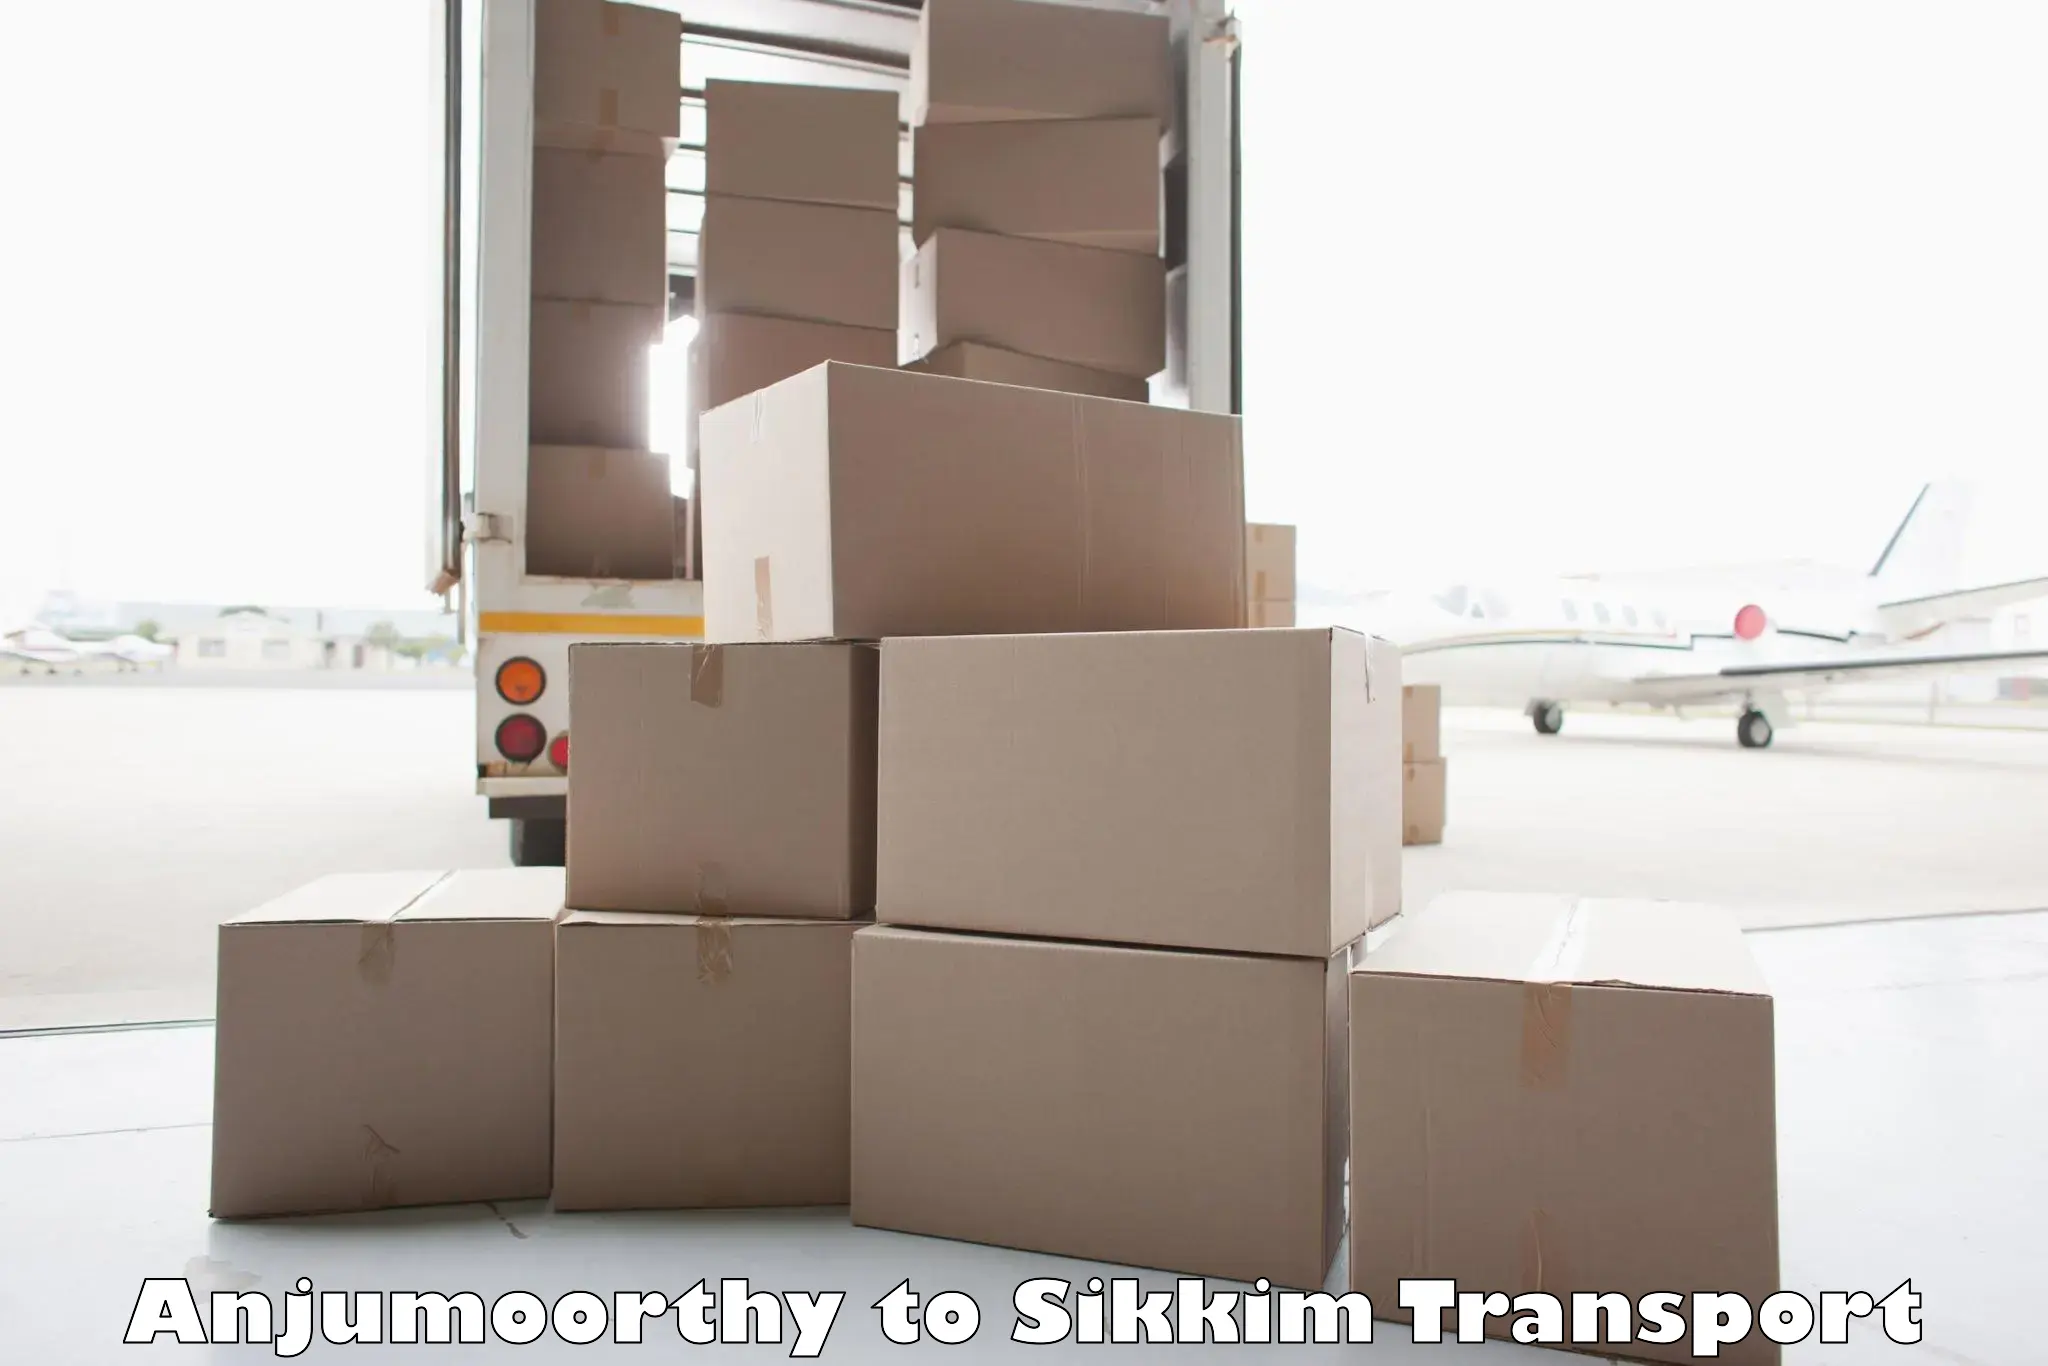 Cargo transport services Anjumoorthy to North Sikkim